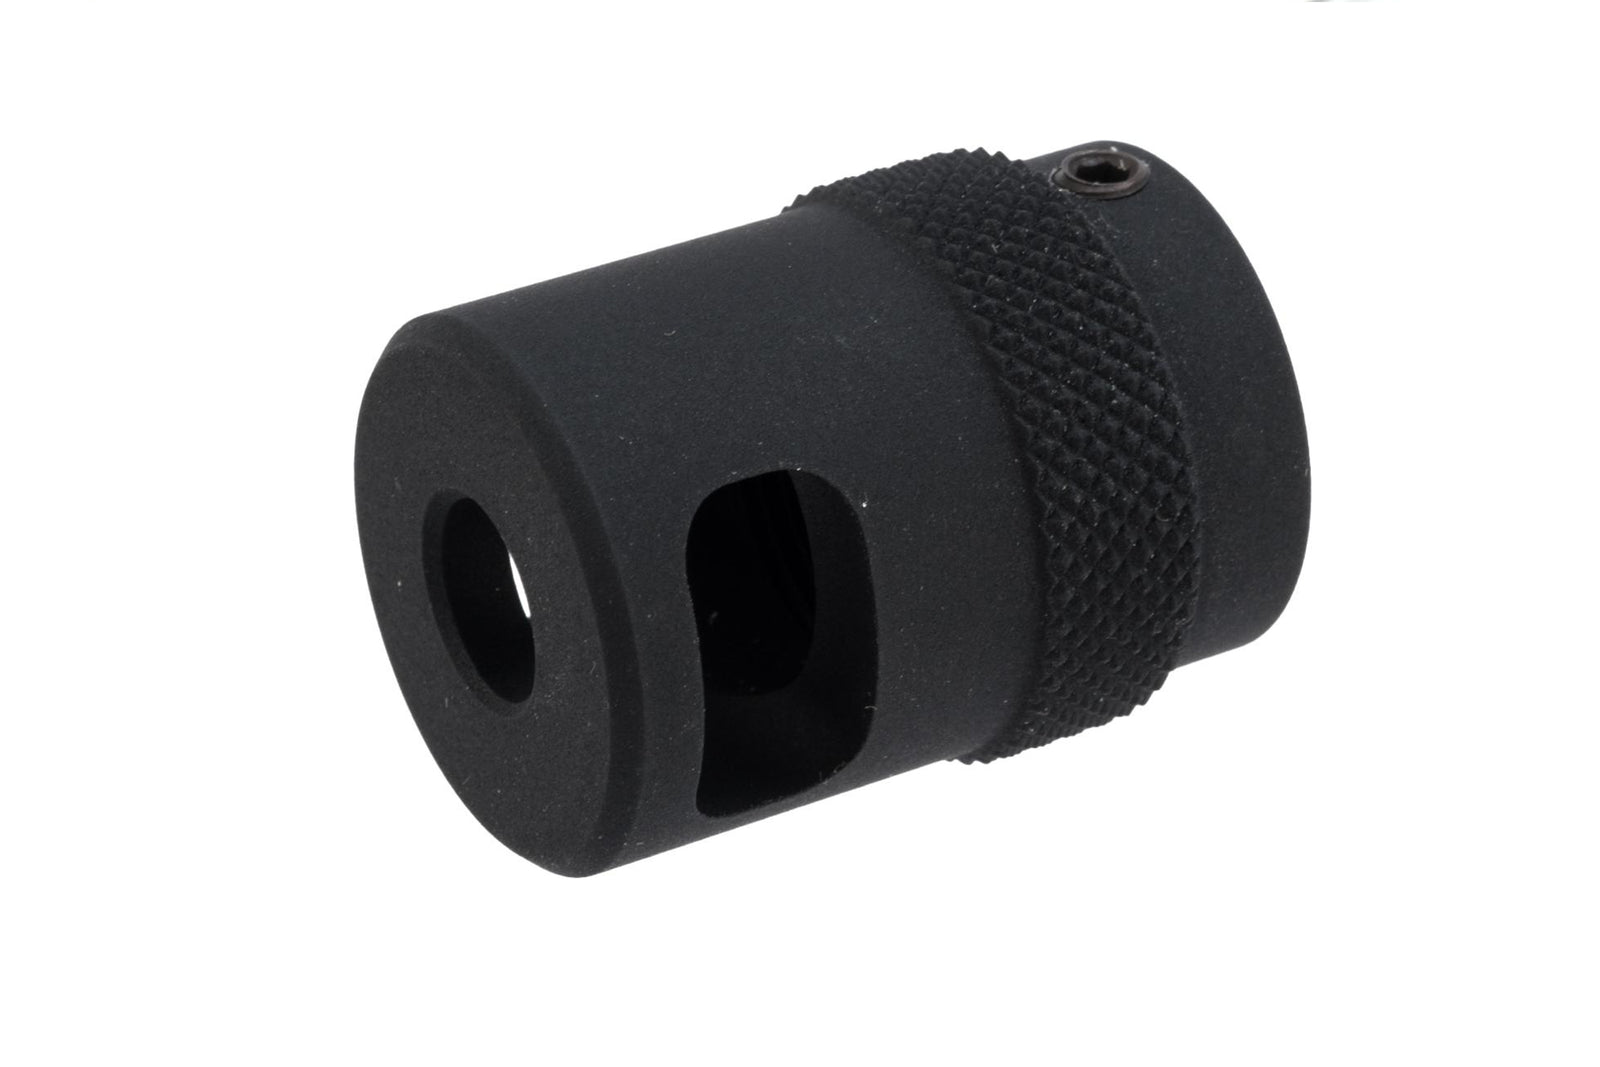 Retro Arms CZ 14mm negative CNC Muzzle Brake for Airsoft AEGs (Model: Type B)